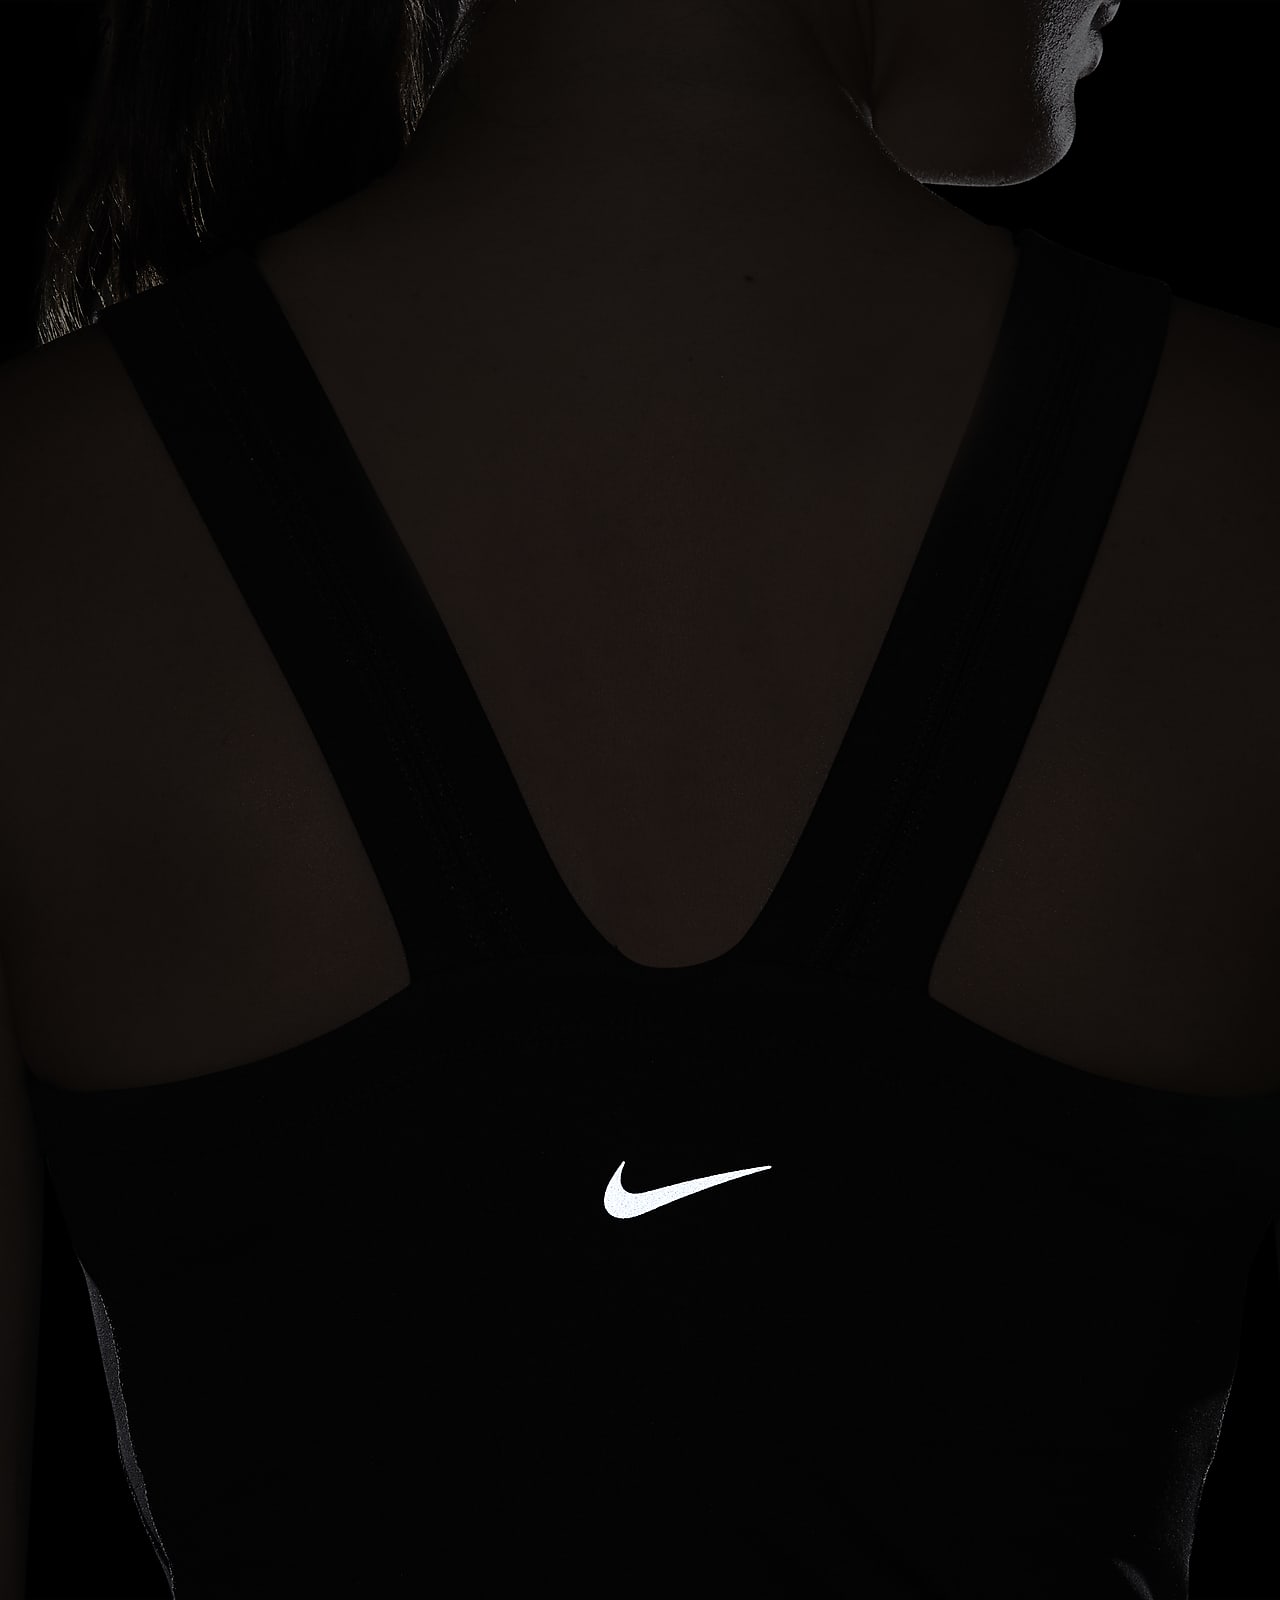 Nike's Strappy Crop Top in Black and White